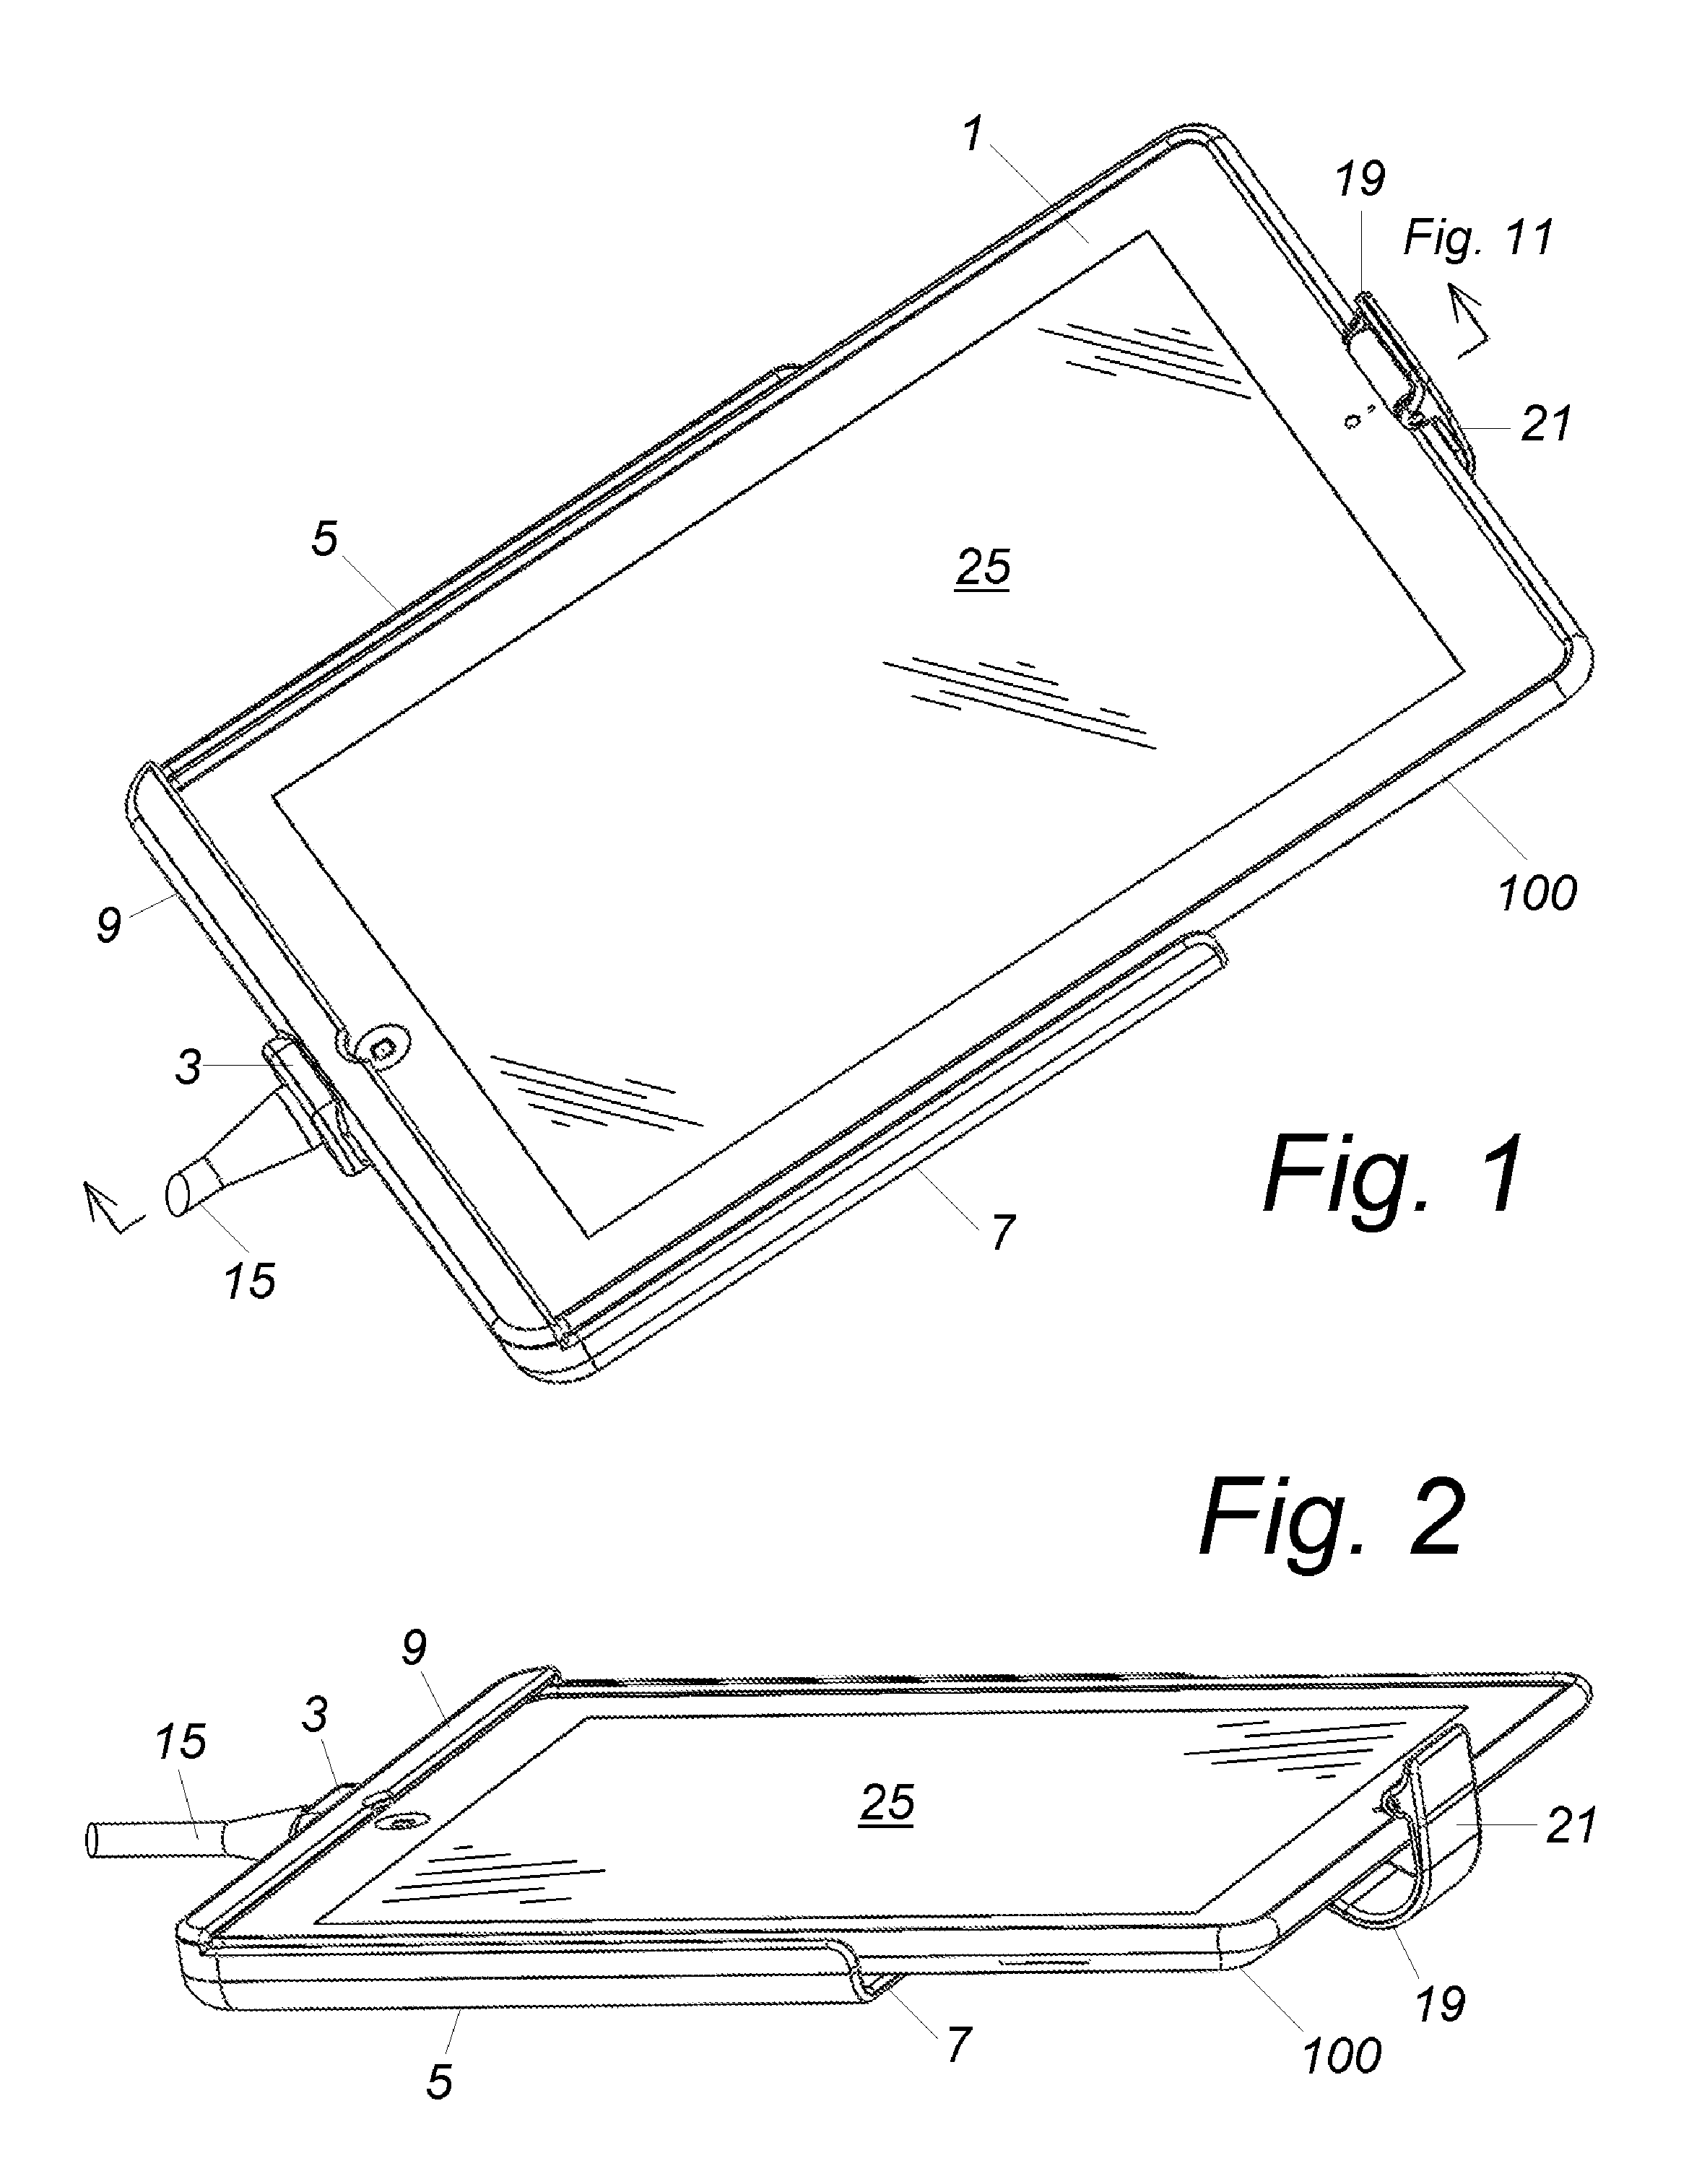 Docking sleeve with electrical adapter